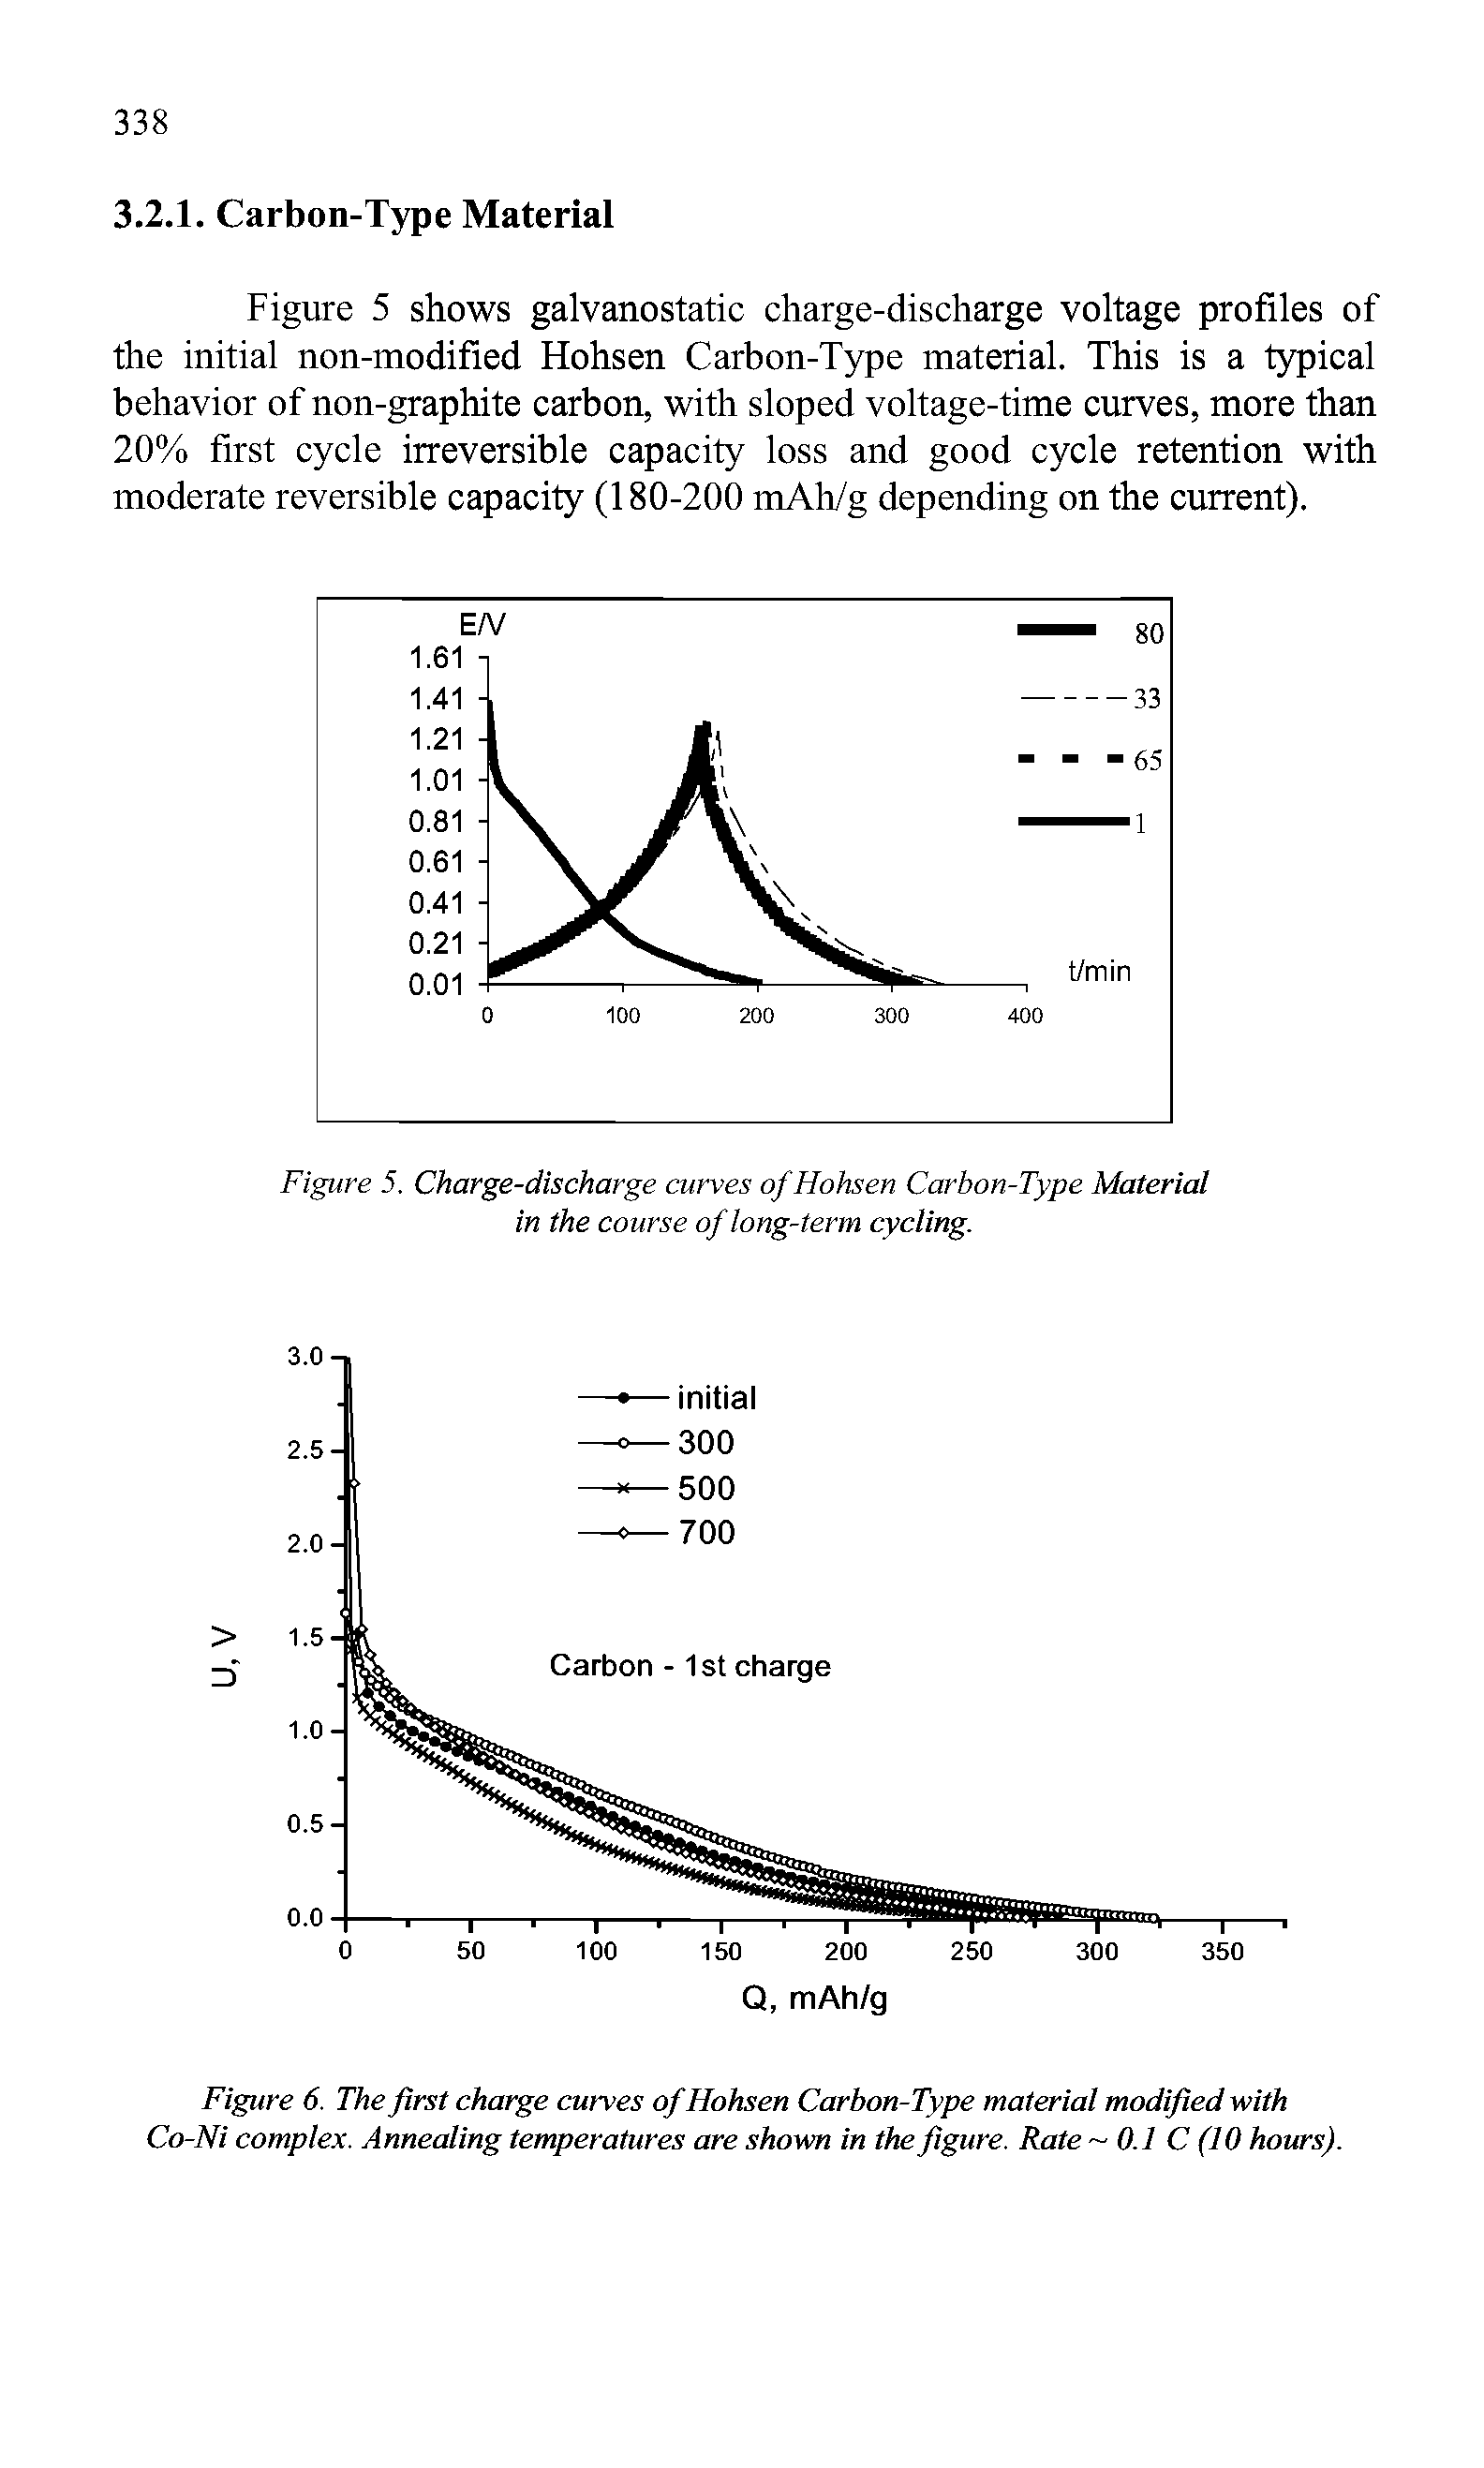 Figure 5. Charge-discharge curves of Hohsen Carbon-Type Material in the course of long-term cycling.